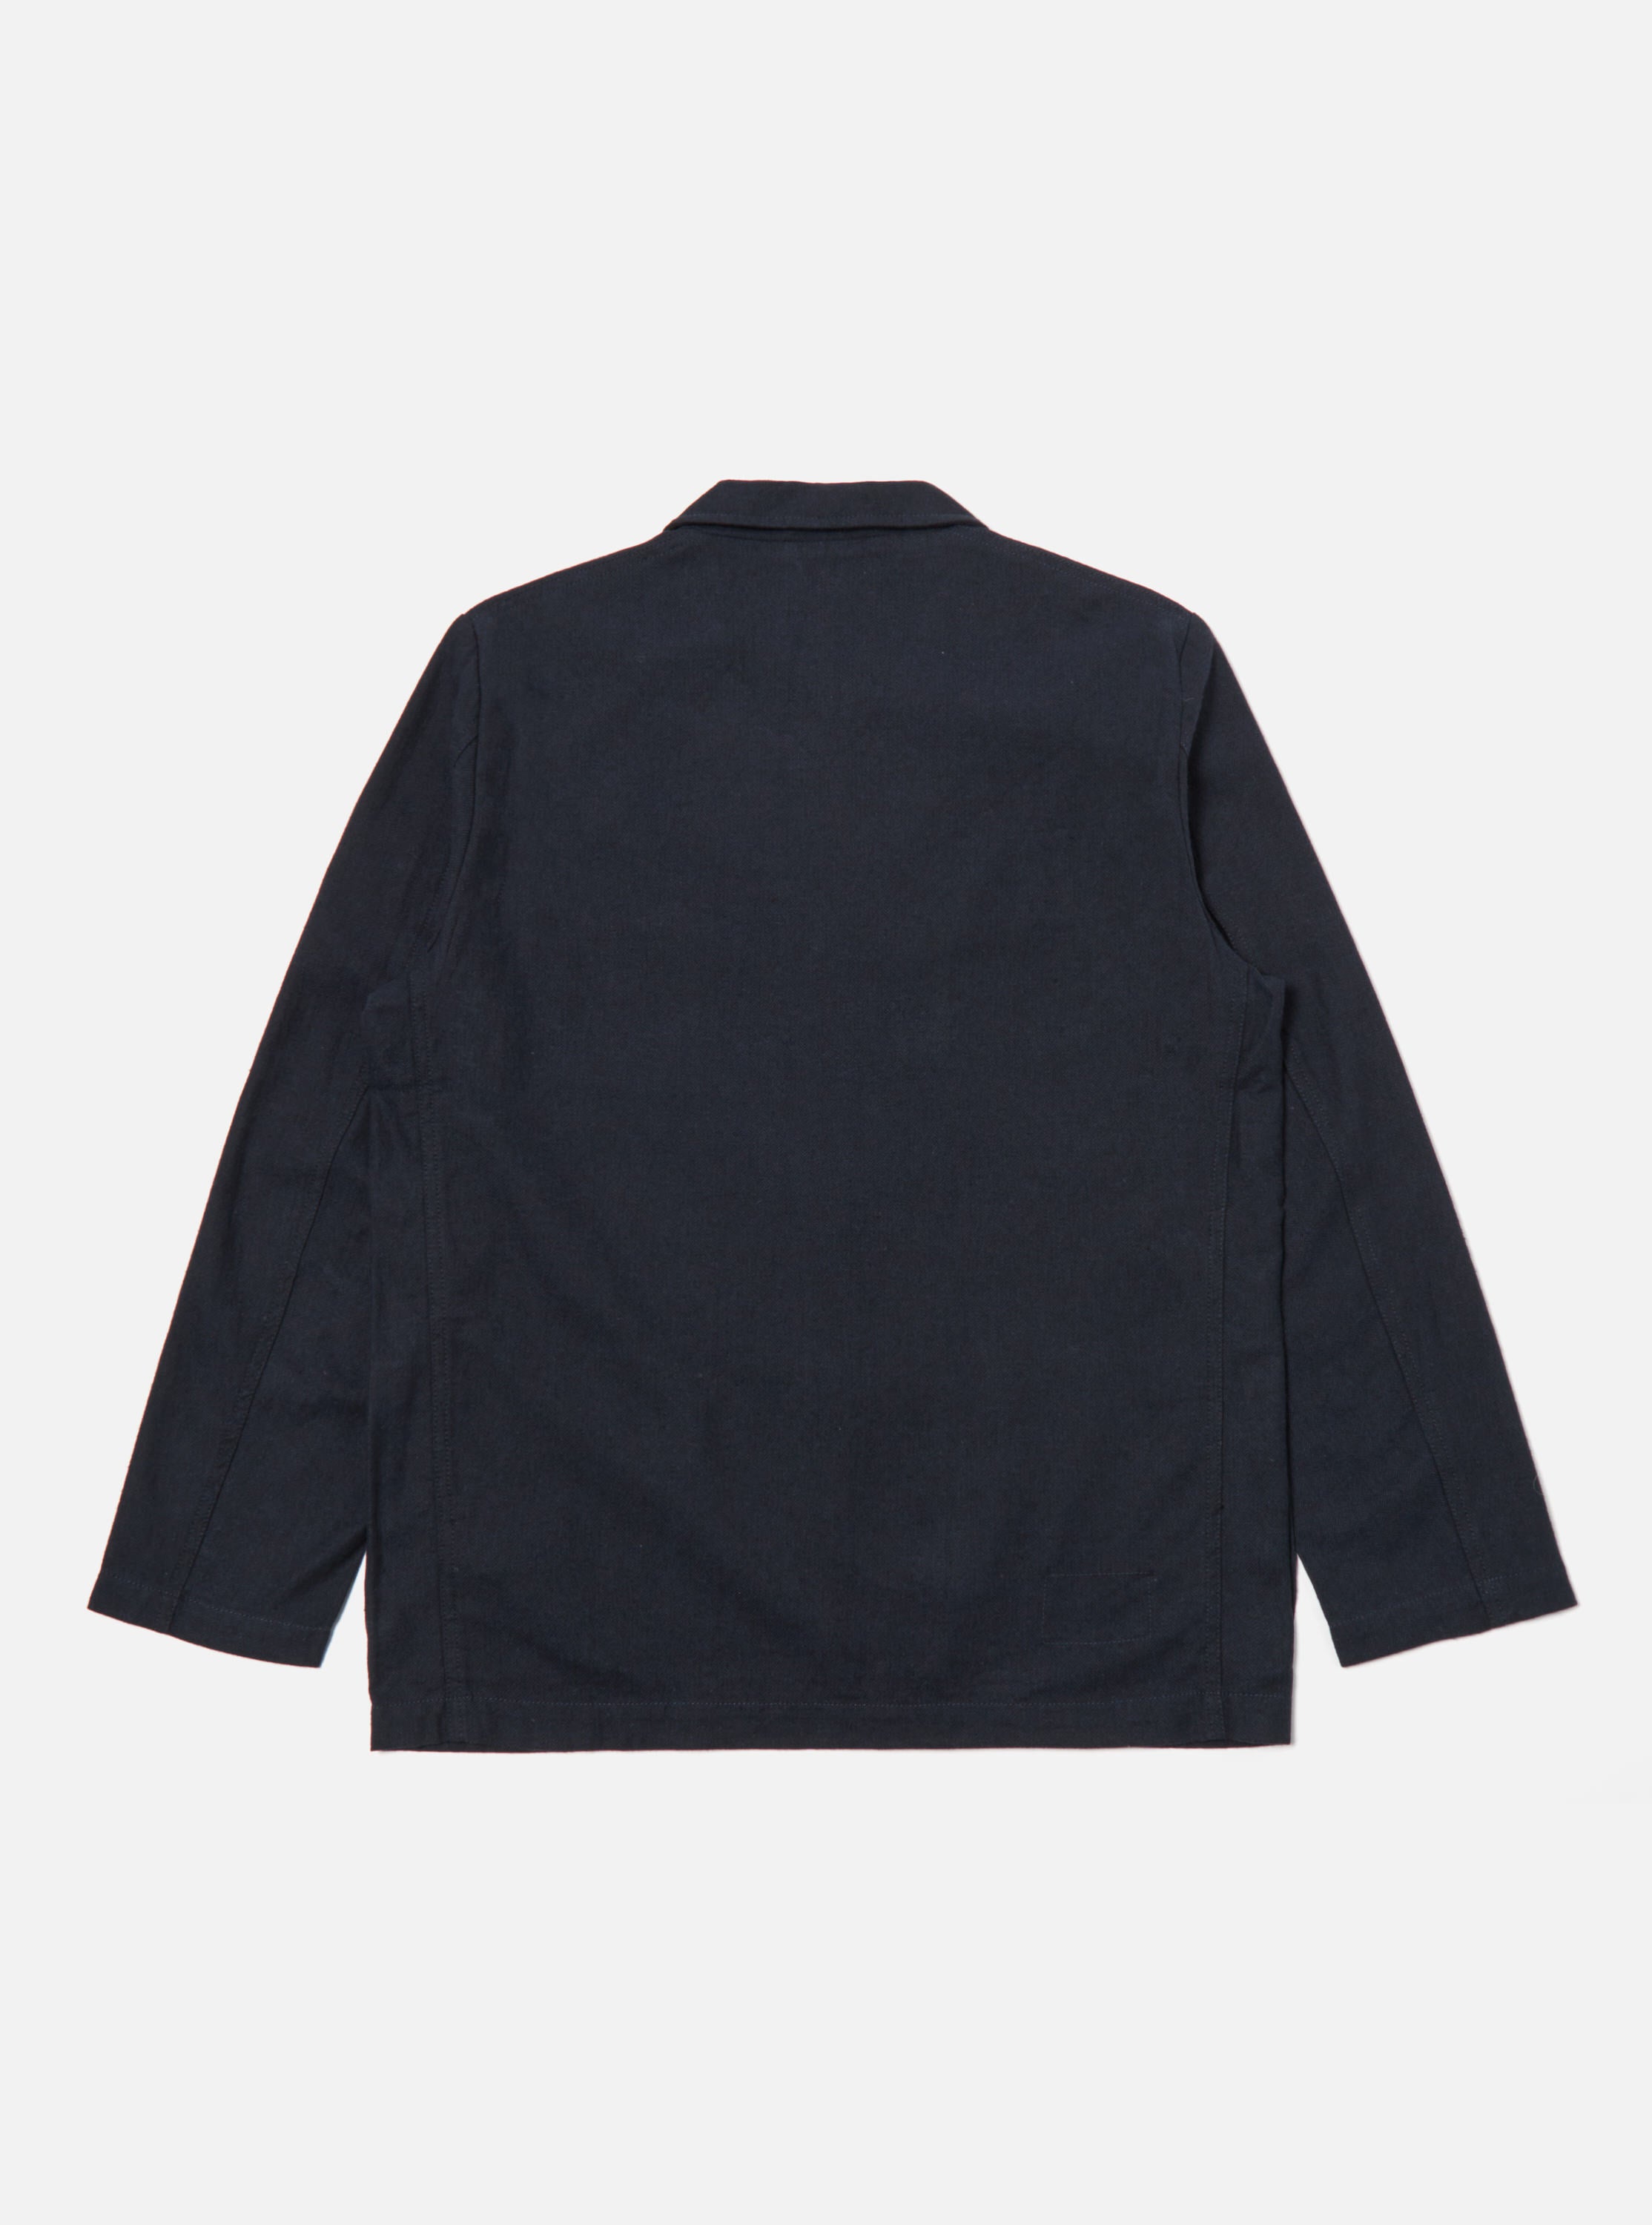 Universal Works Three Button Jacket in Navy Veta Upcycled Cotton